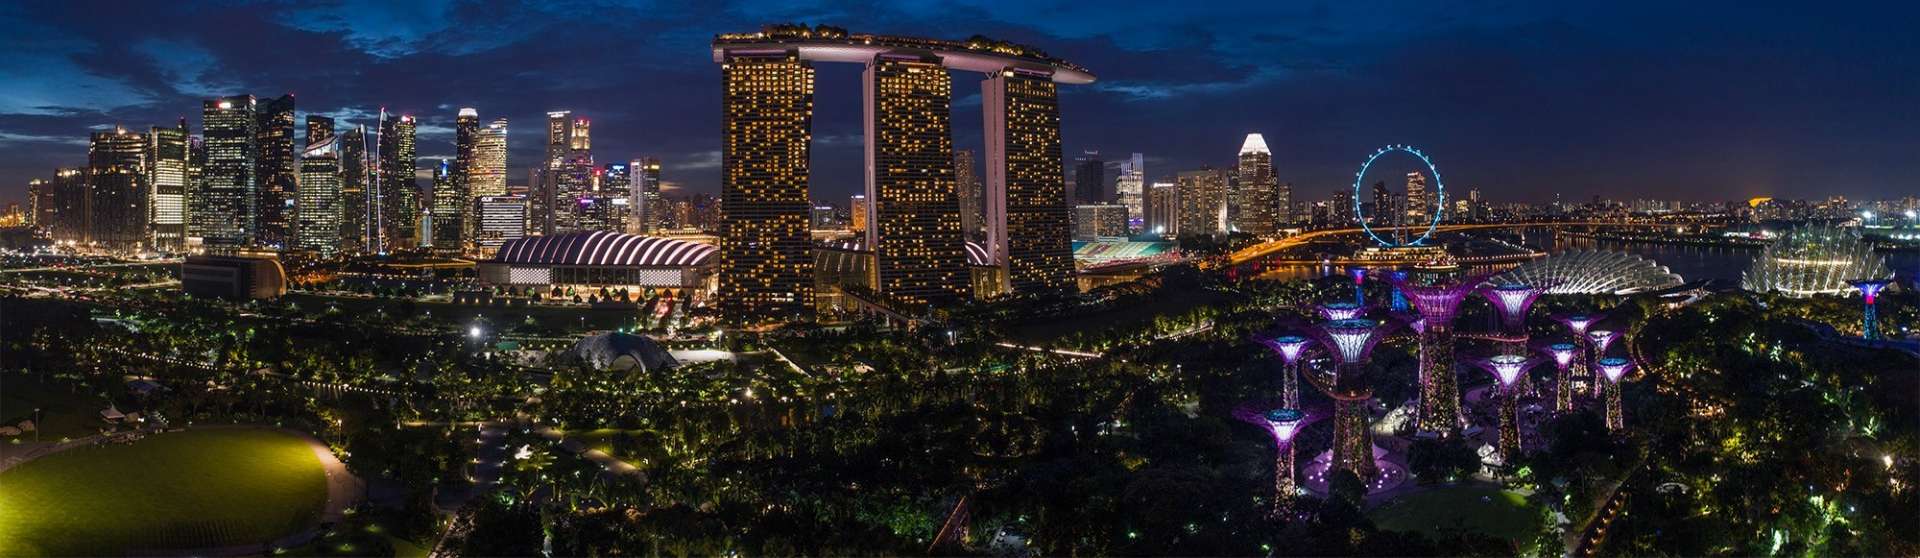 Singapore Pescart Enrico Pescantini Gardens by the Bay Marina Bay Sands nightscape drone